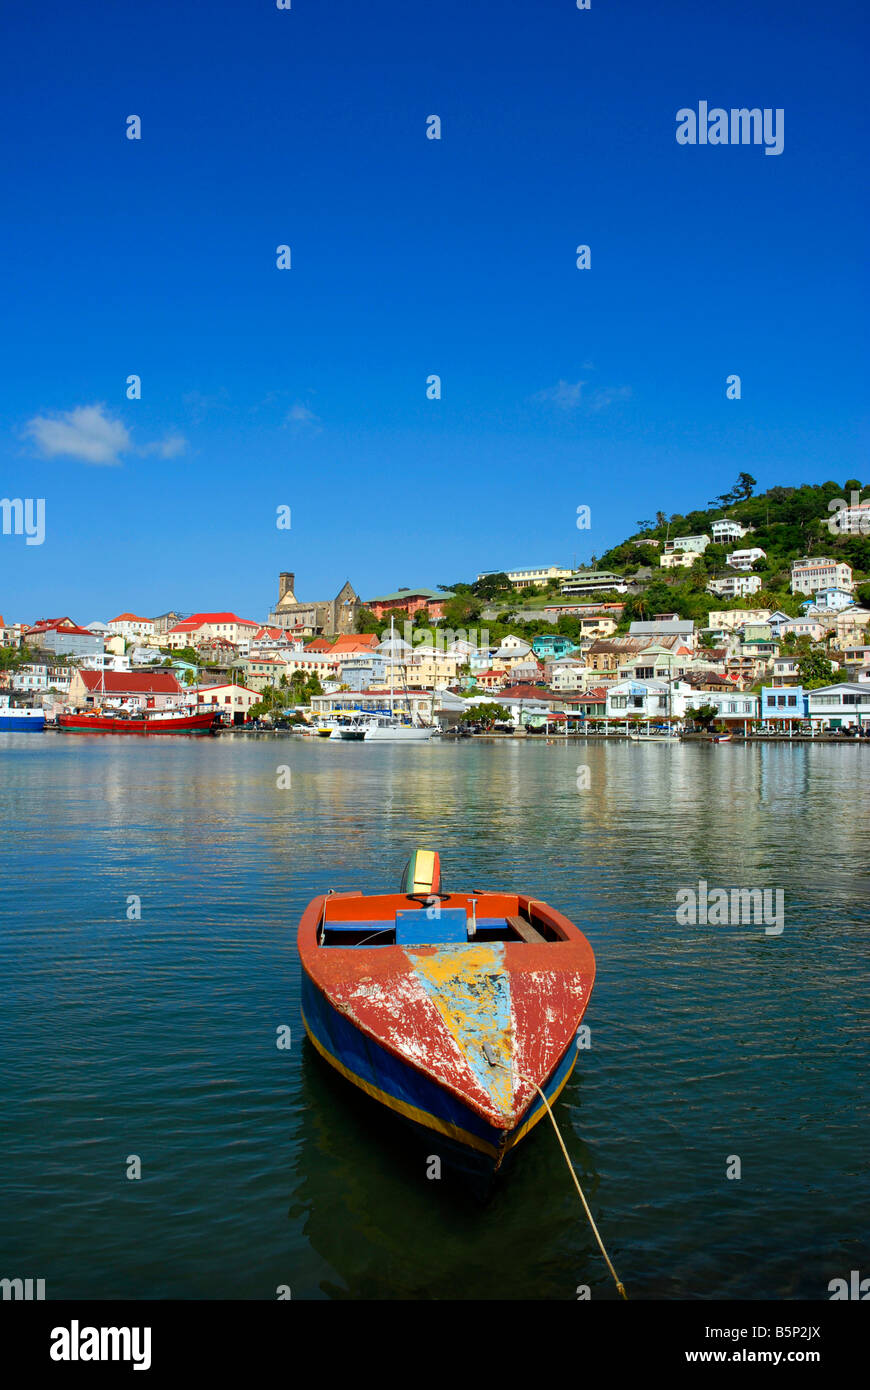 The Carenage and harbour area, St George's, Grenada, 'West Indies' Stock Photo